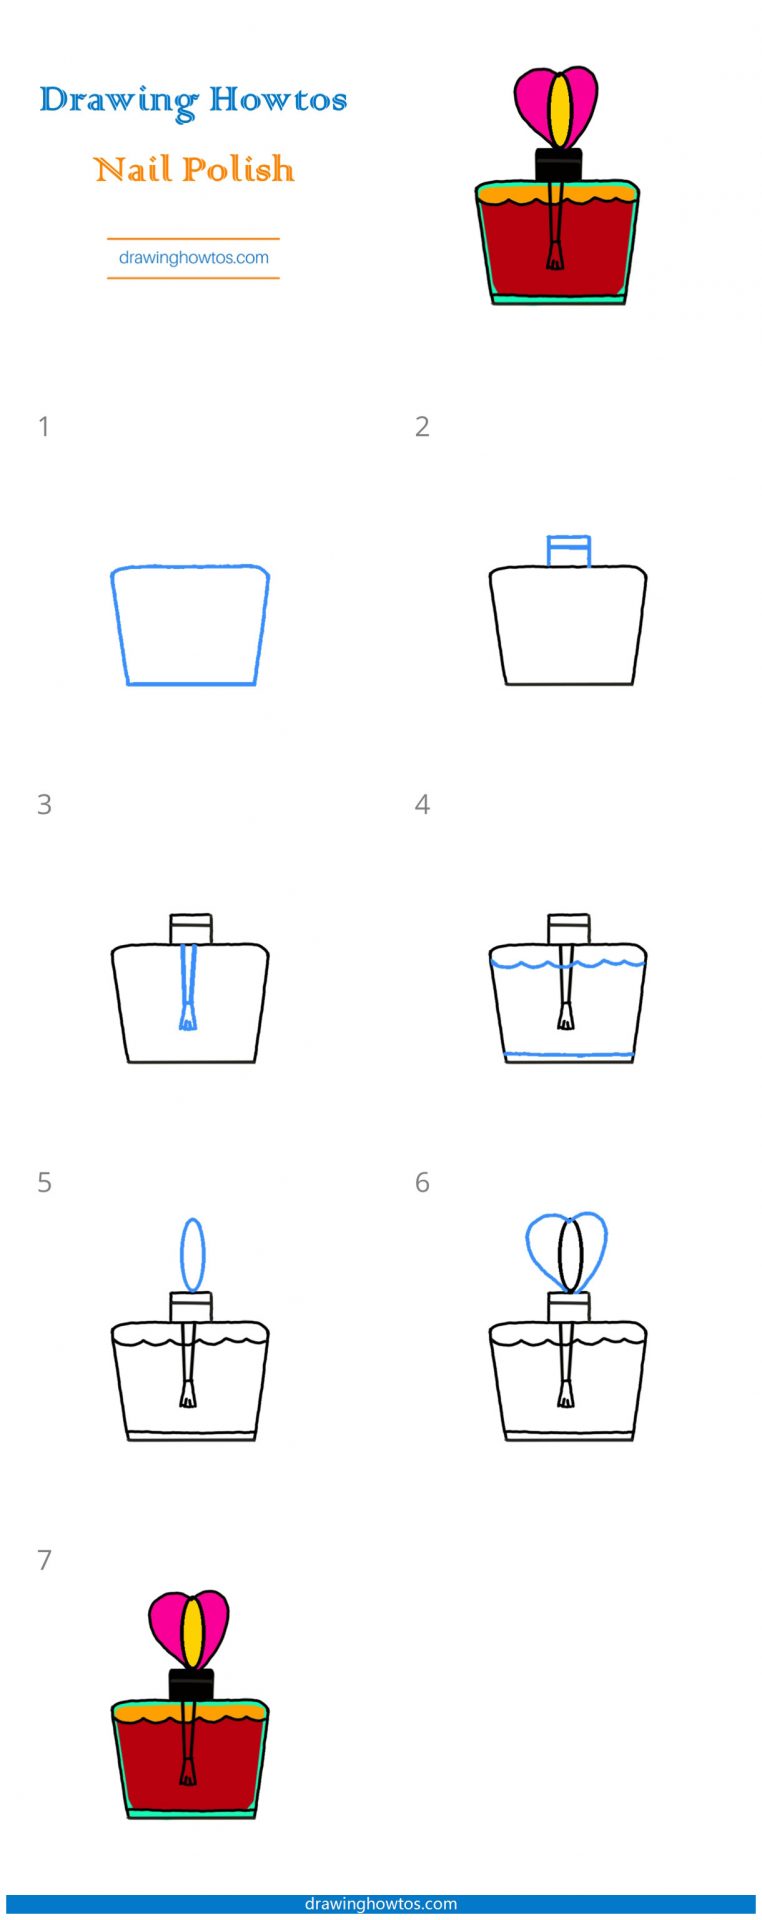 How To Draw a Nail Polish Bottle Step by Step